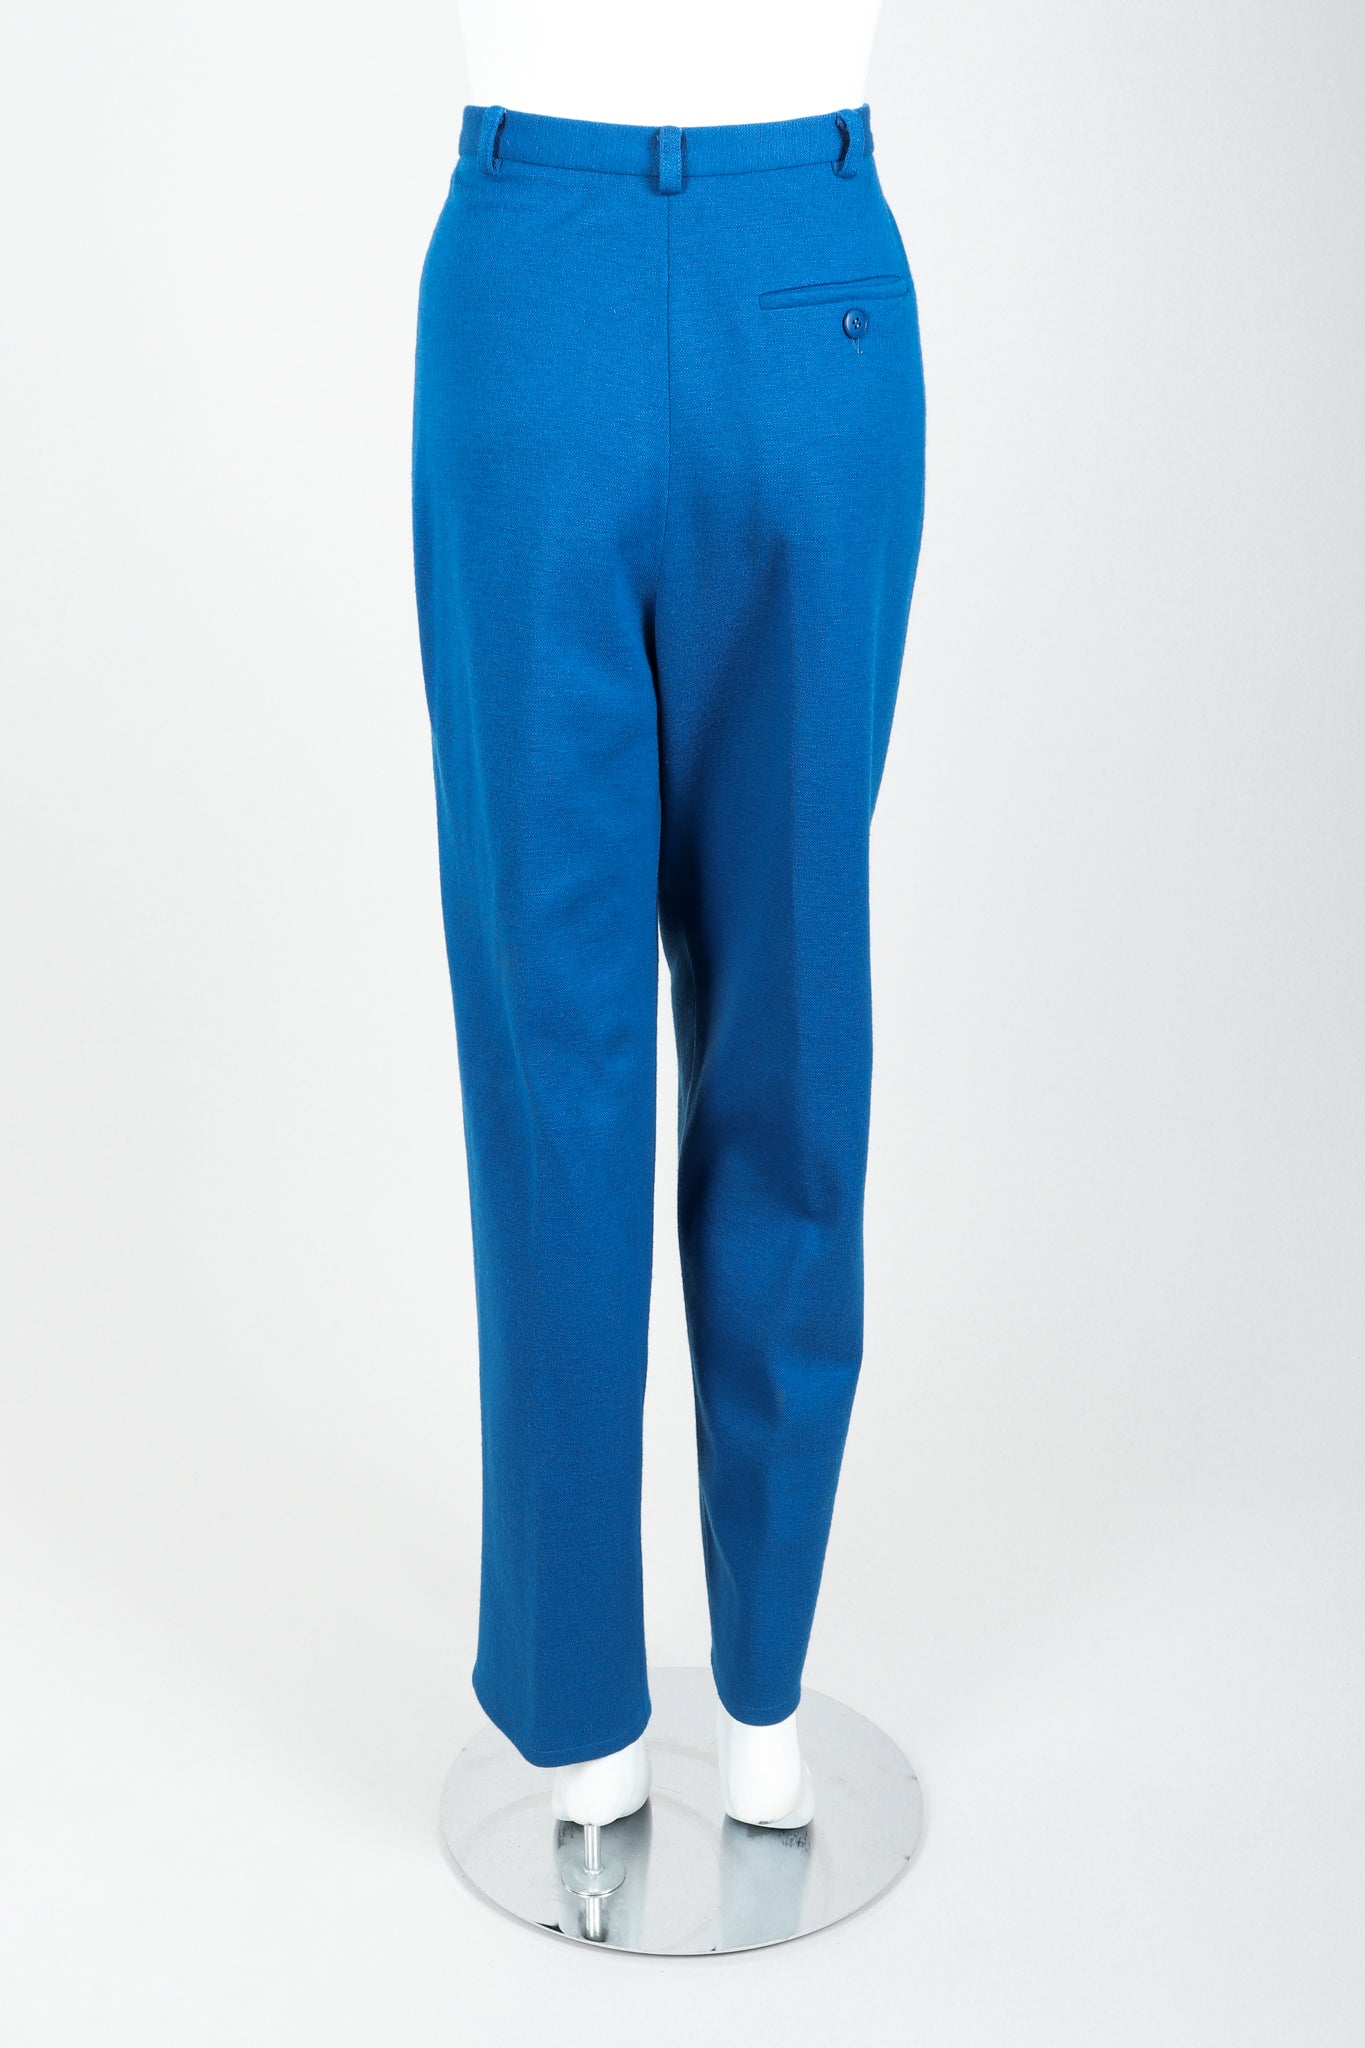 Vintage Sonia Rykiel Blue Knit Pleated Pant Set on Mannequin back at Recess